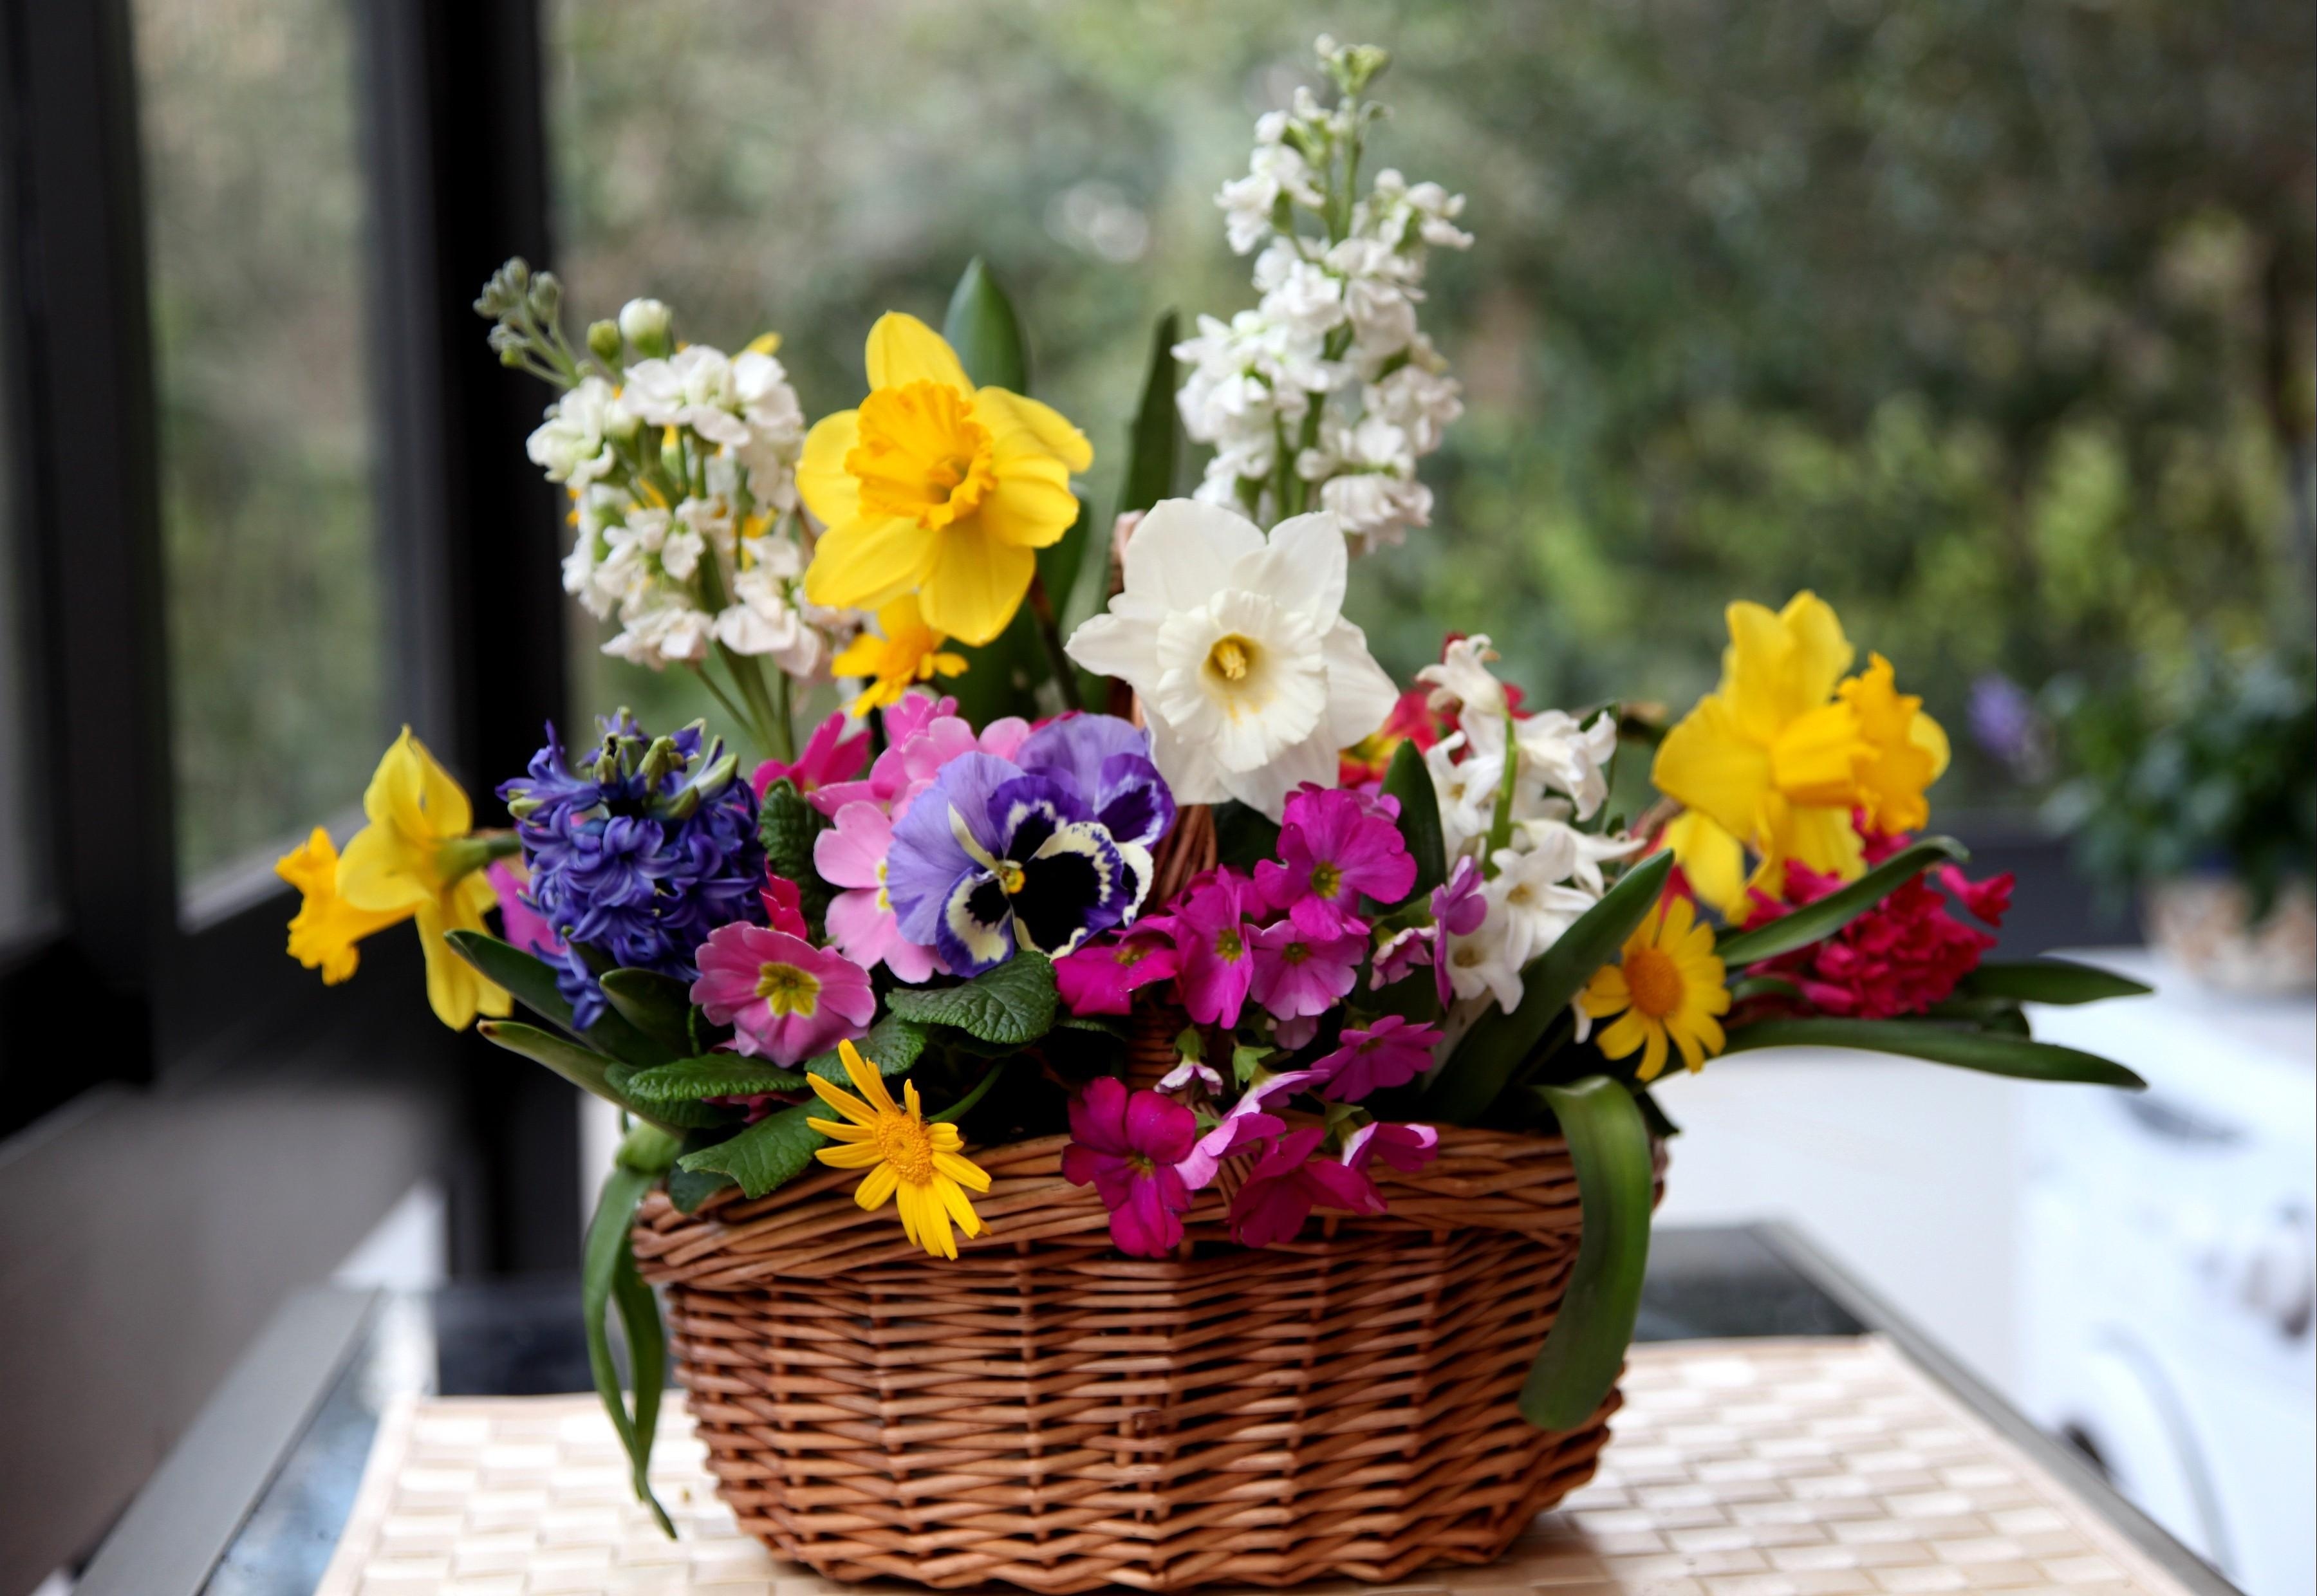 flowers, pansies, narcissussi, hyacinth, basket, composition